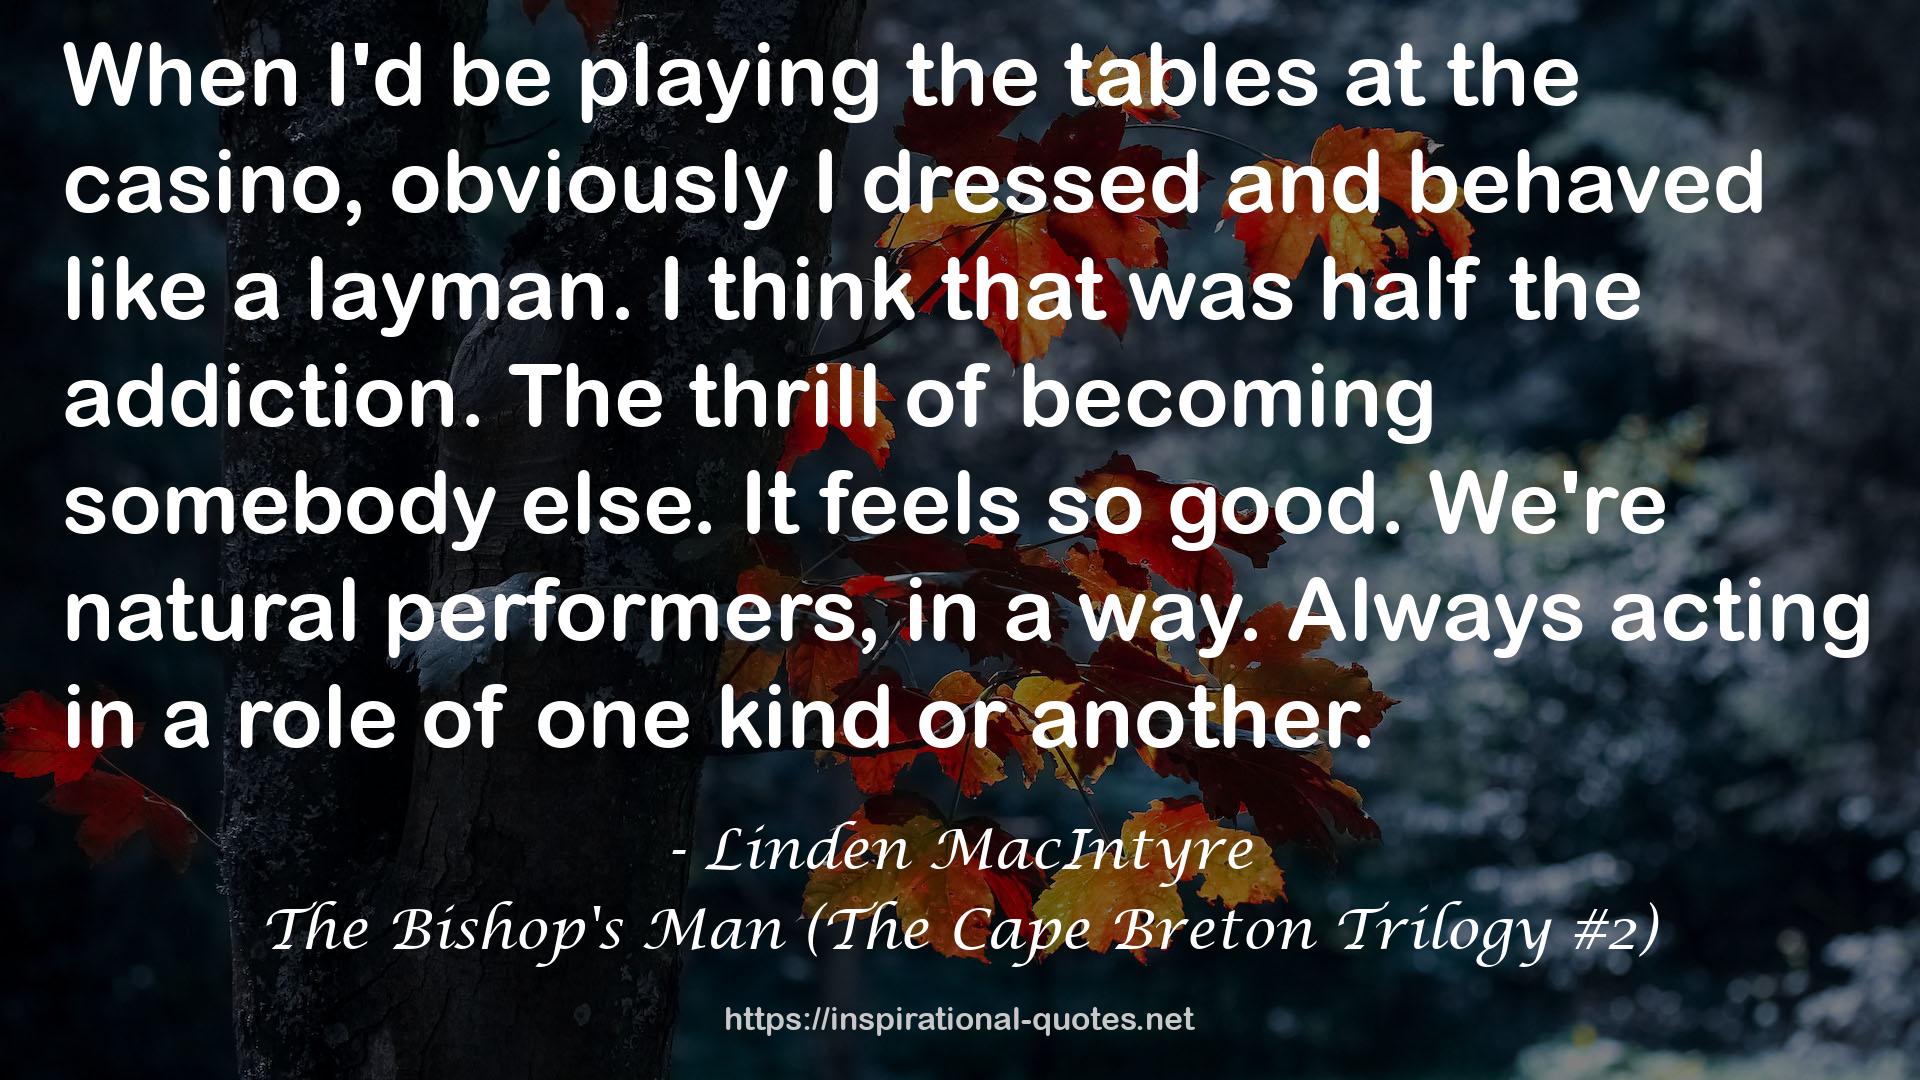 The Bishop's Man (The Cape Breton Trilogy #2) QUOTES